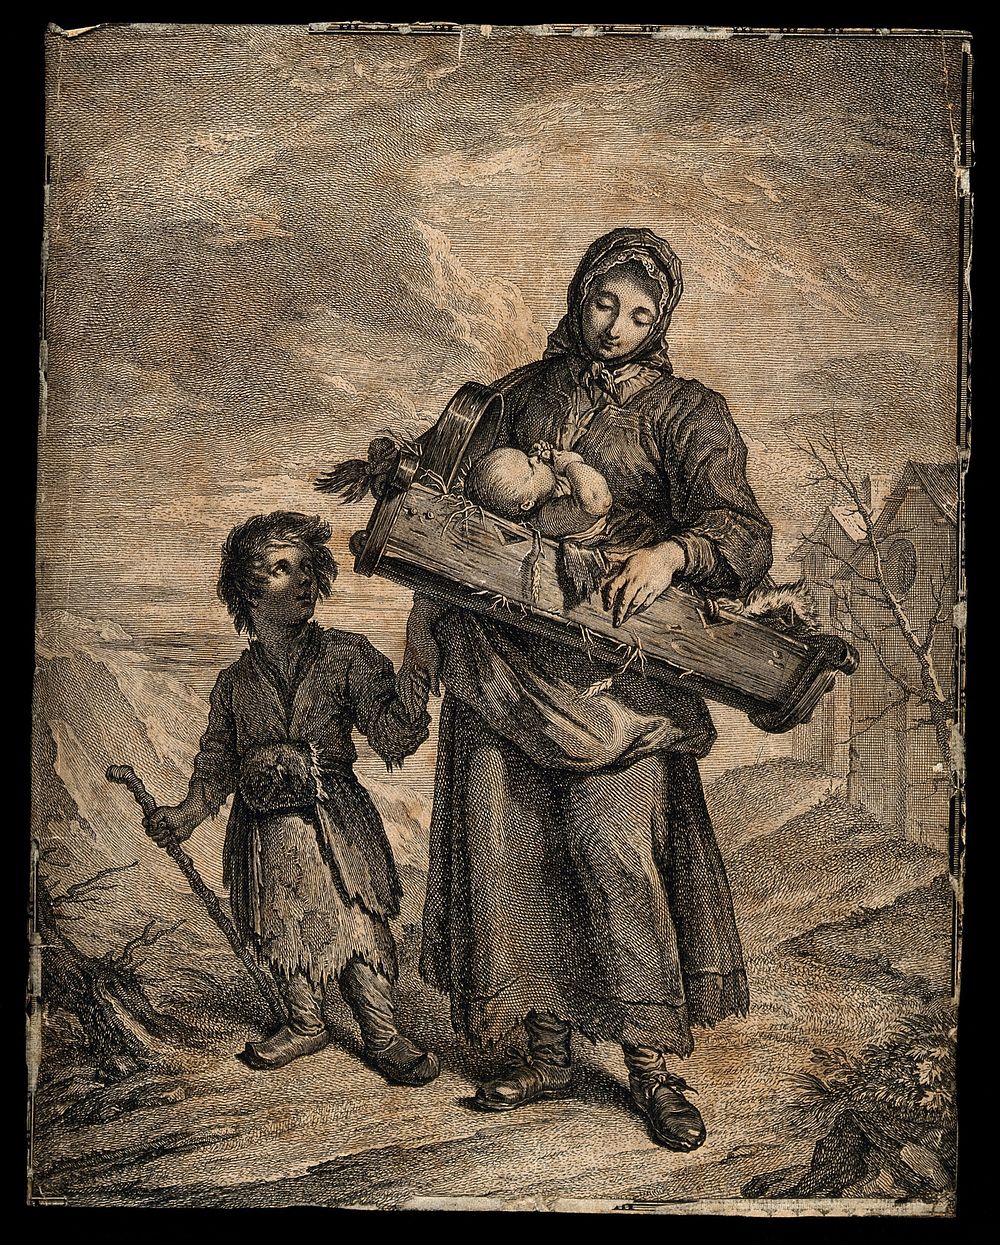 A woman carrying a baby and holding the hand of her small child in a bleak rural setting. Engraving.